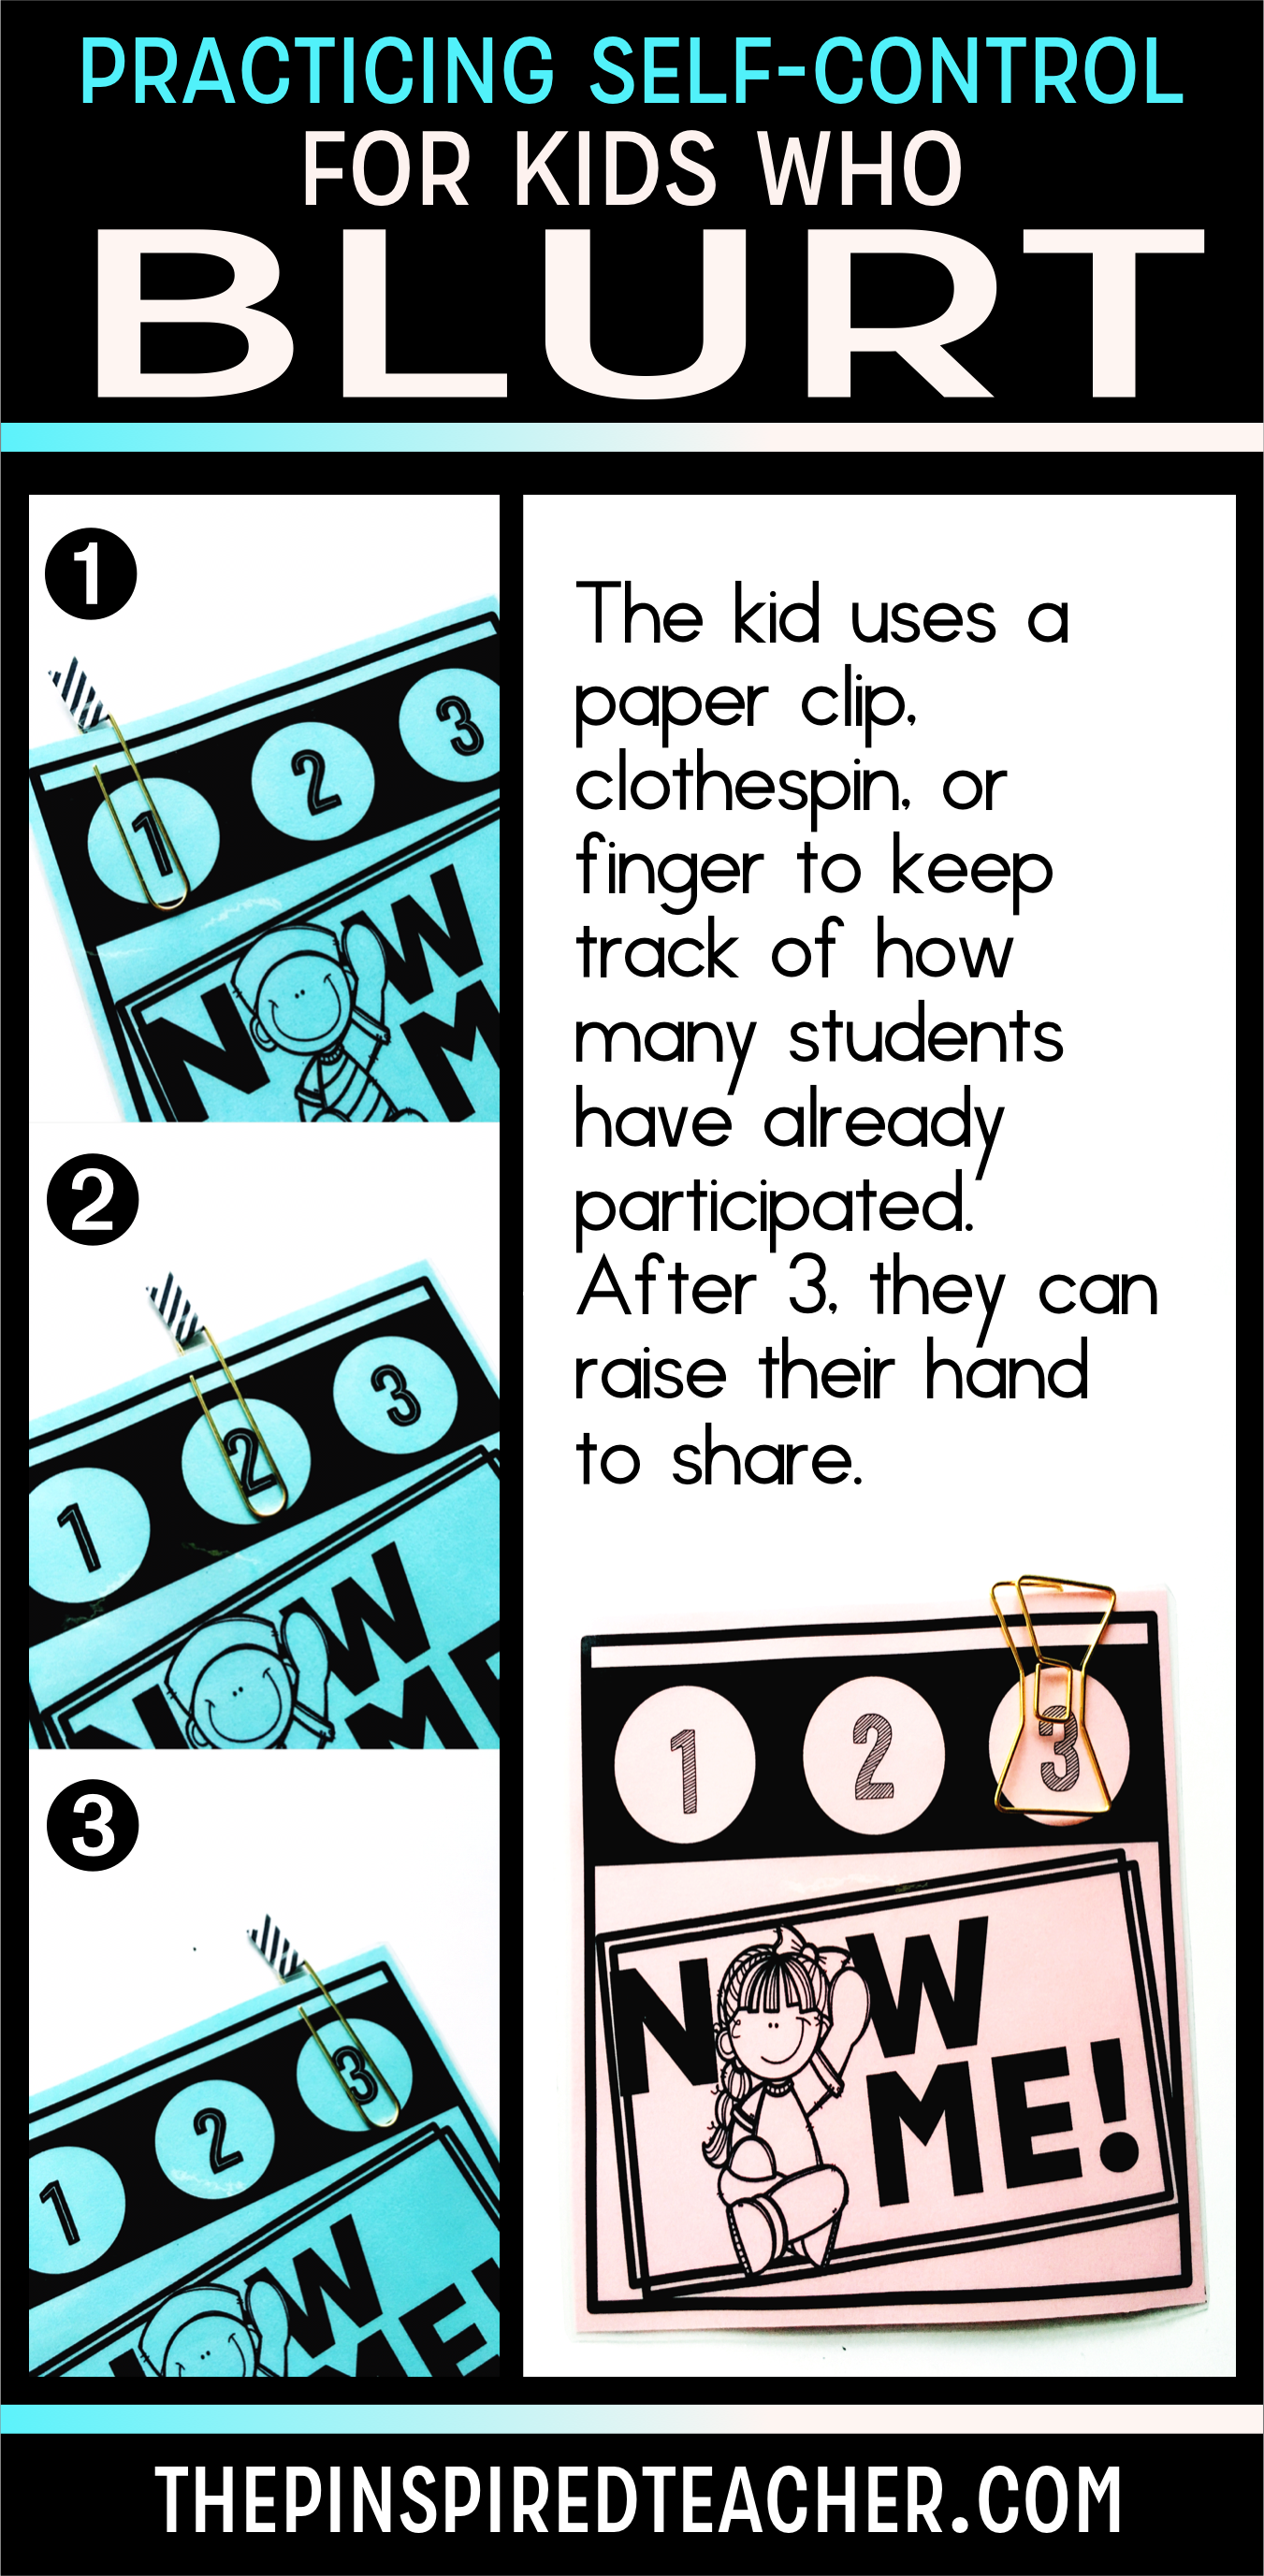 123 Now Me Strategy For The Kid Who Blurts Out During Class or Overshares | Behavior Management | PBIS | Classroom Management Ideas | Classroom Management Strategies by The Pinspired Teacher